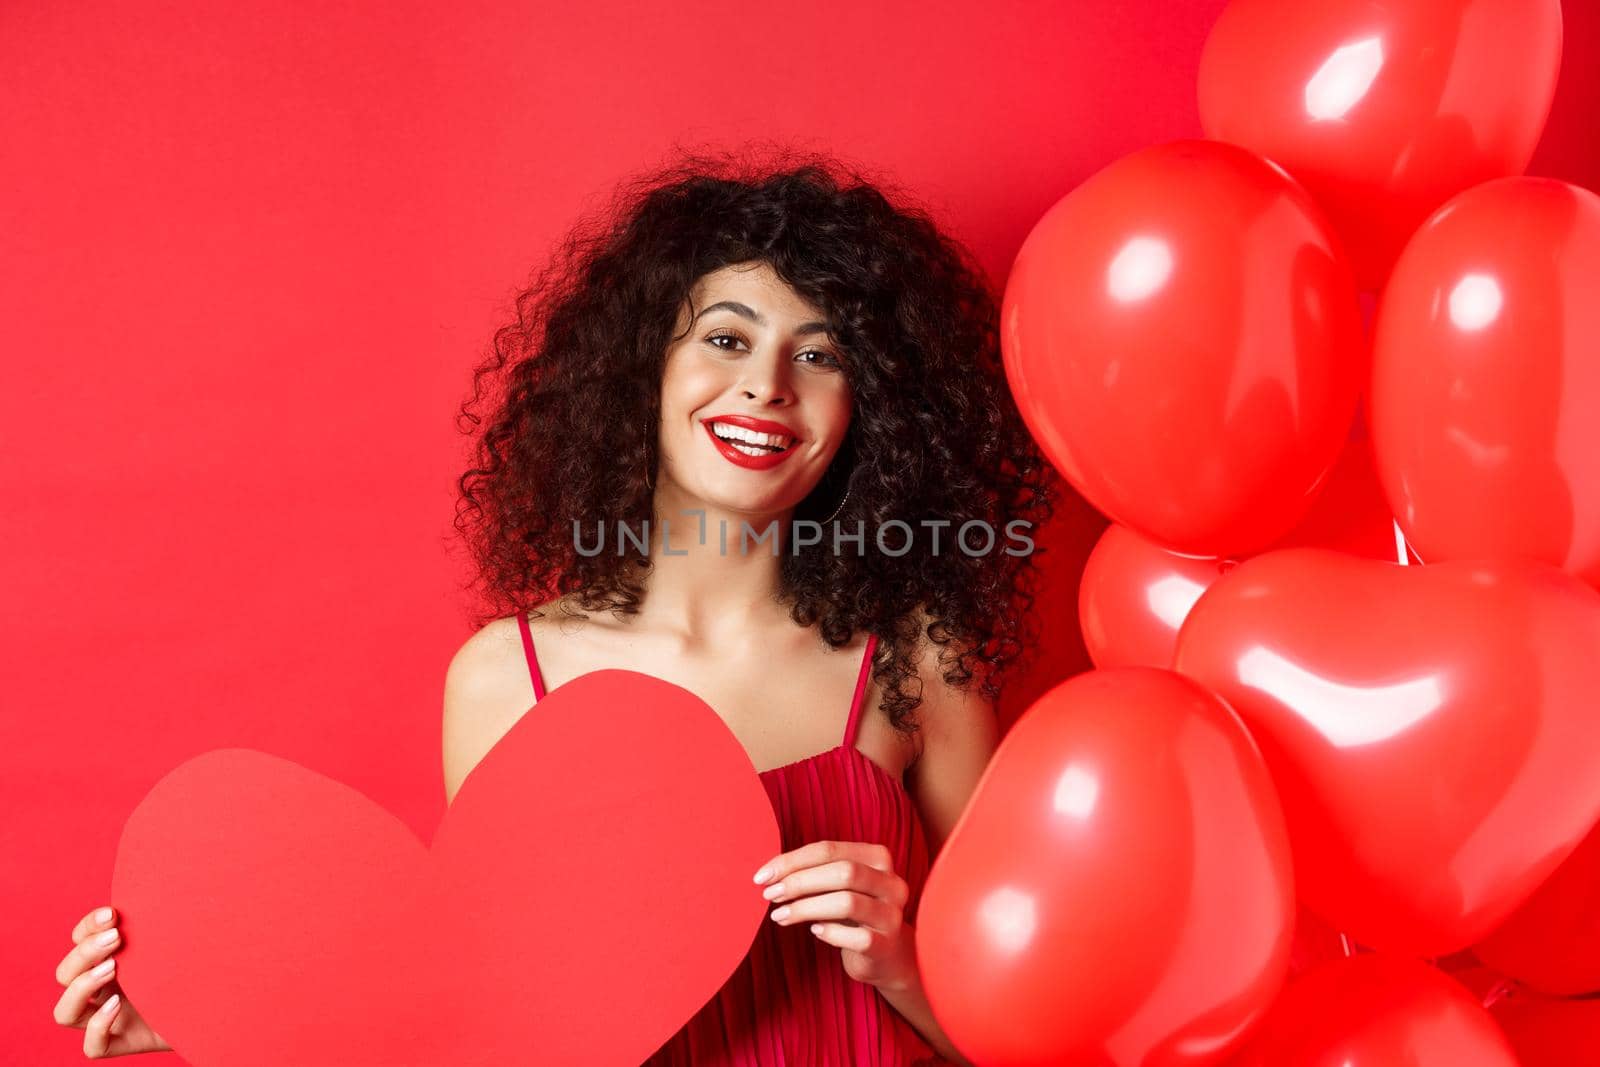 Happy valentines day. Romantic girl in dress waiting for true love, showing big red heart and standing near balloons on red background.